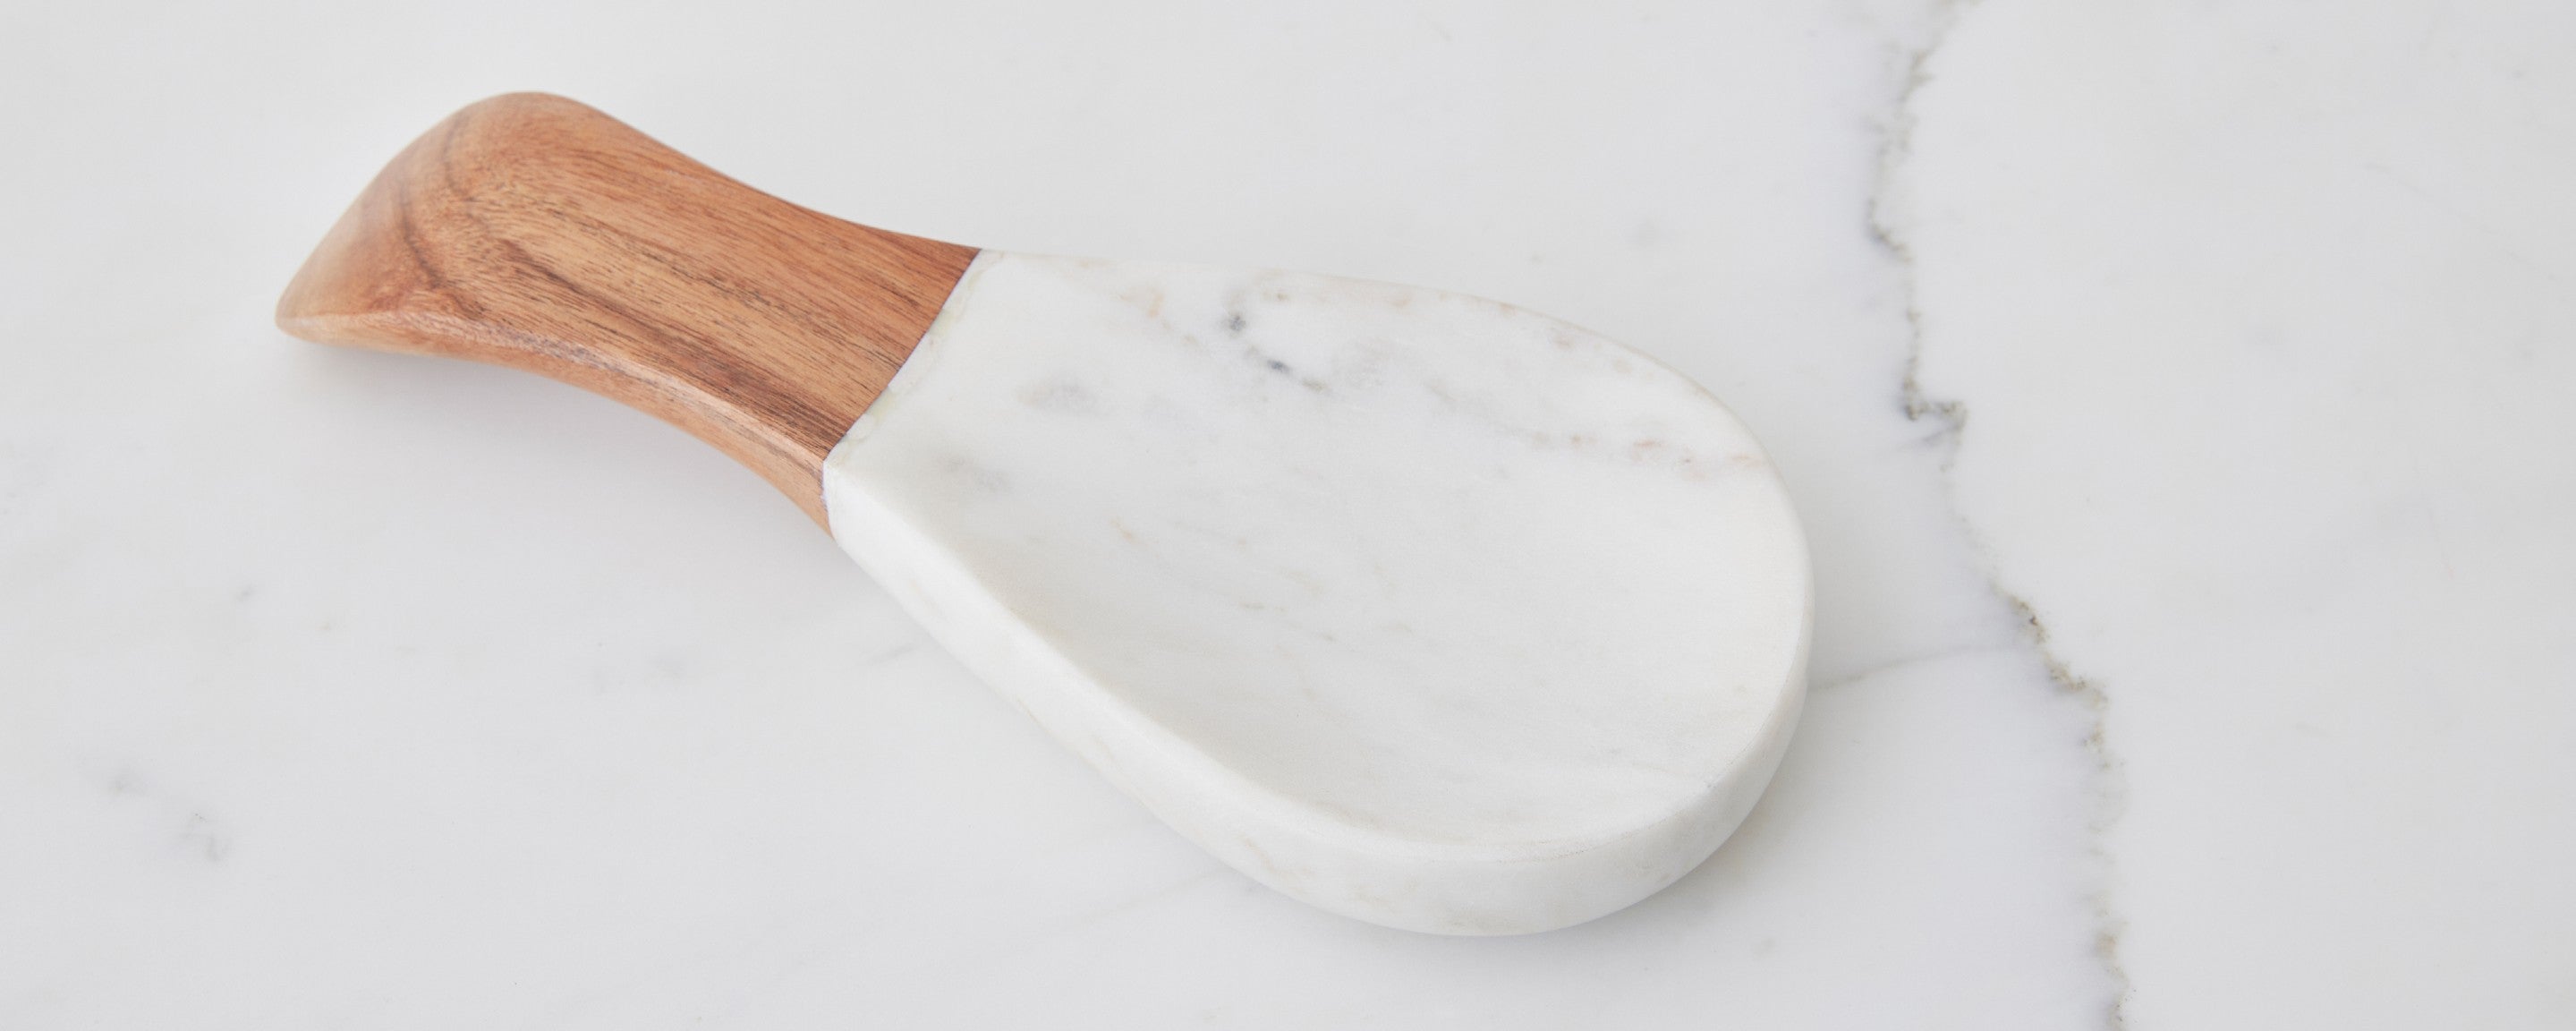 marble and acacia wood spoon rest